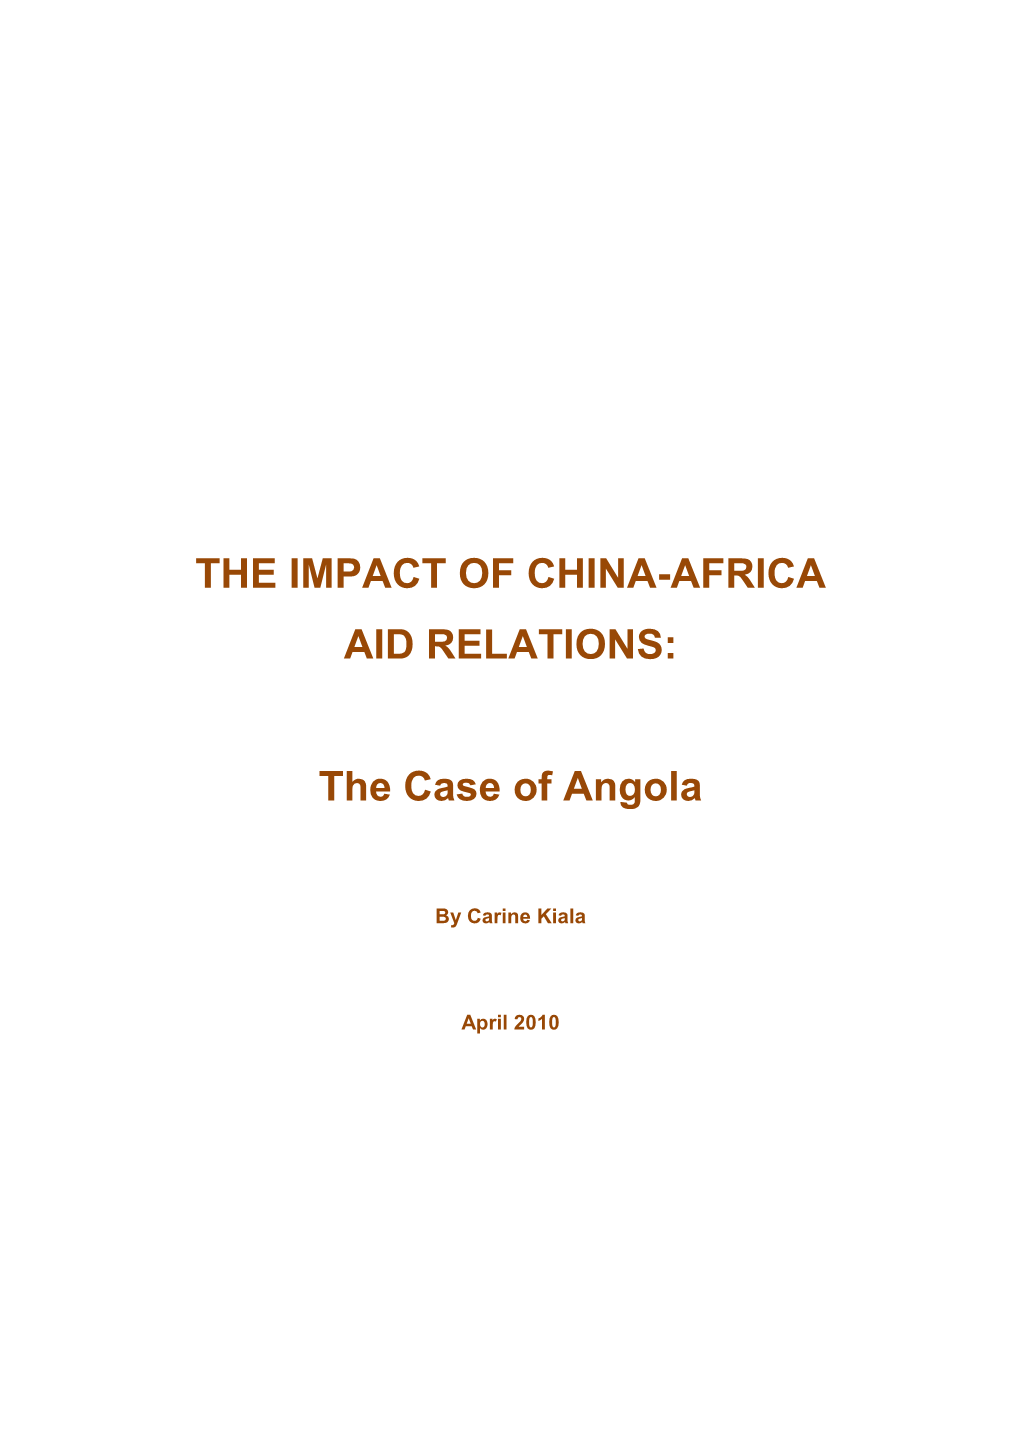 THE IMPACT of CHINA-AFRICA AID RELATIONS: the Case of Angola